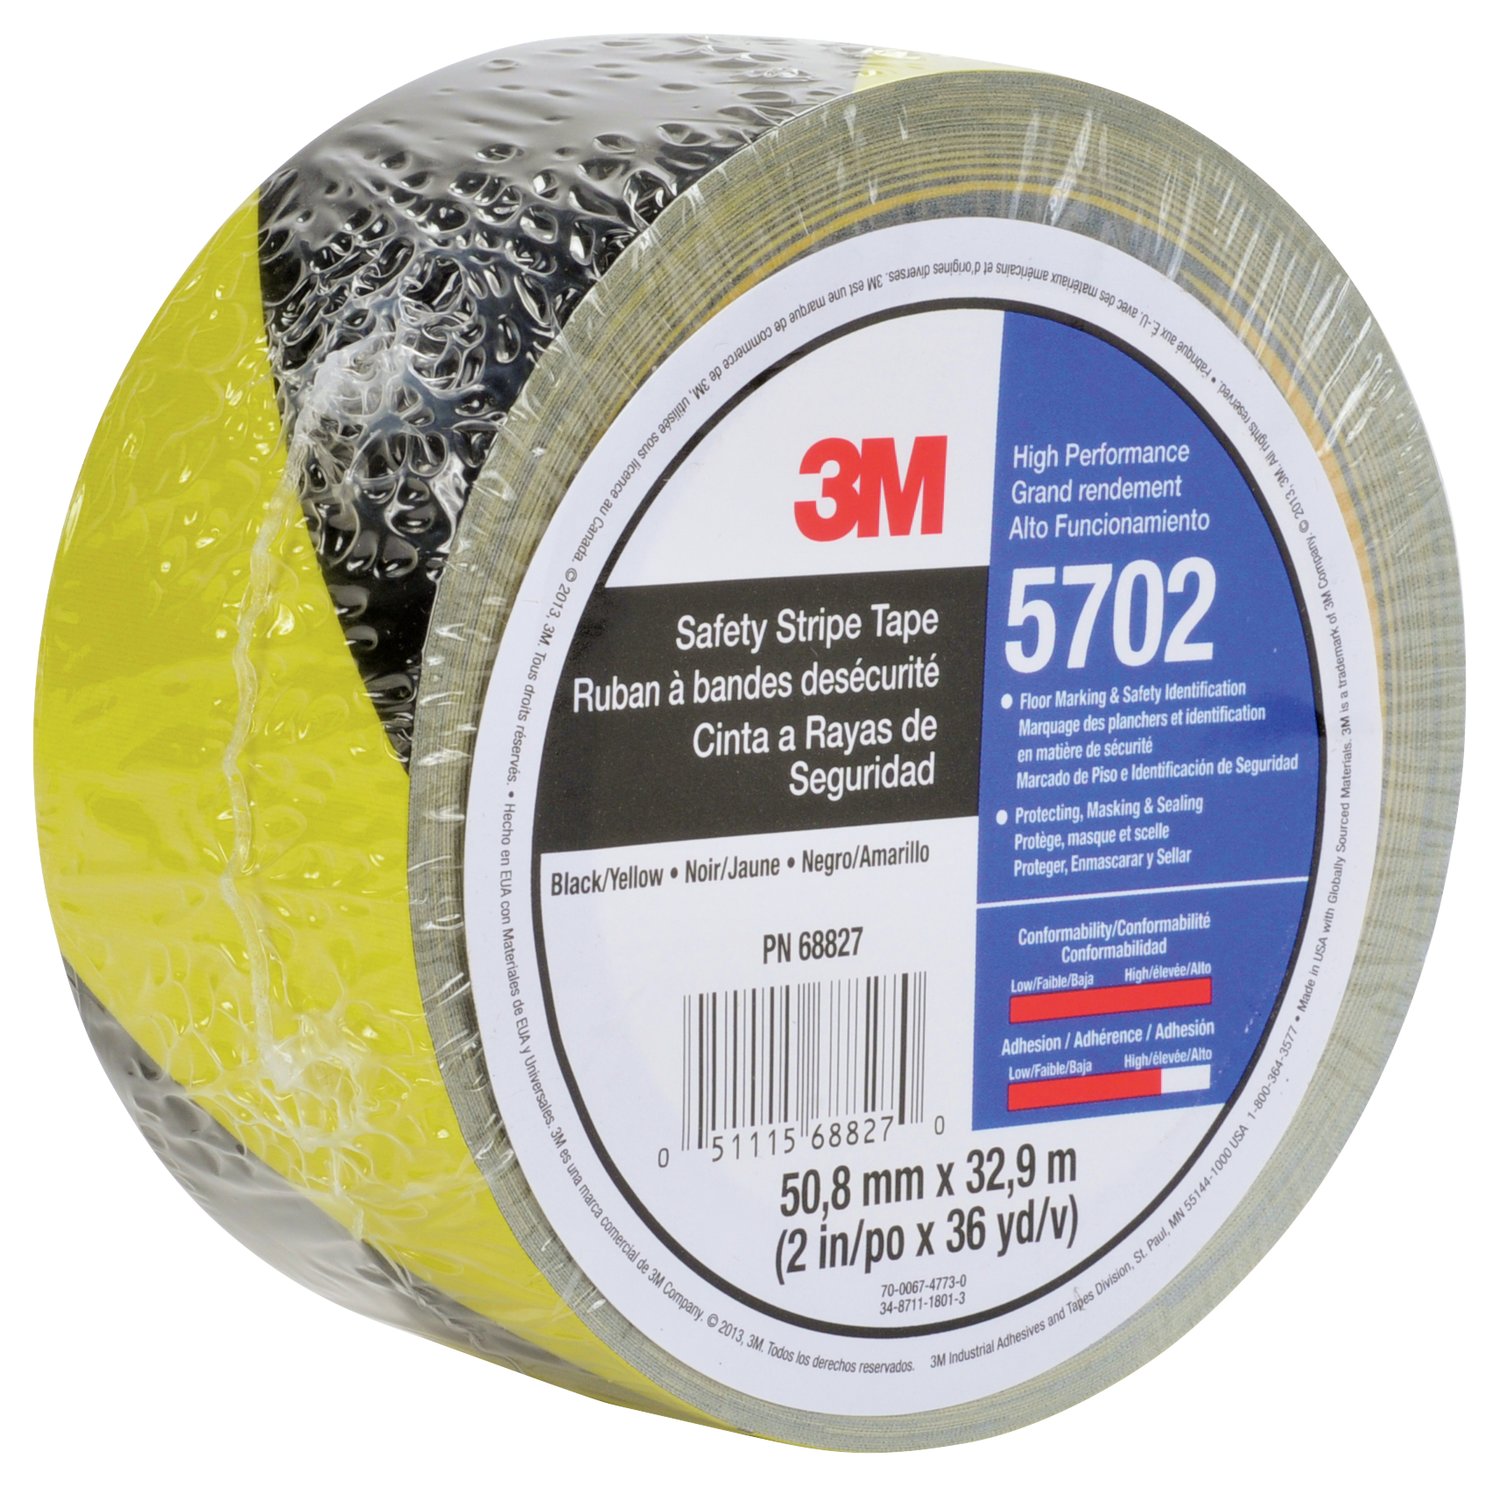 7010335133 - 3M Safety Stripe Vinyl Tape 5702, Black/Yellow, 2 in x 36 yd, 5.4 mil, 24 Roll/Case, Individually Wrapped Conveniently Packaged